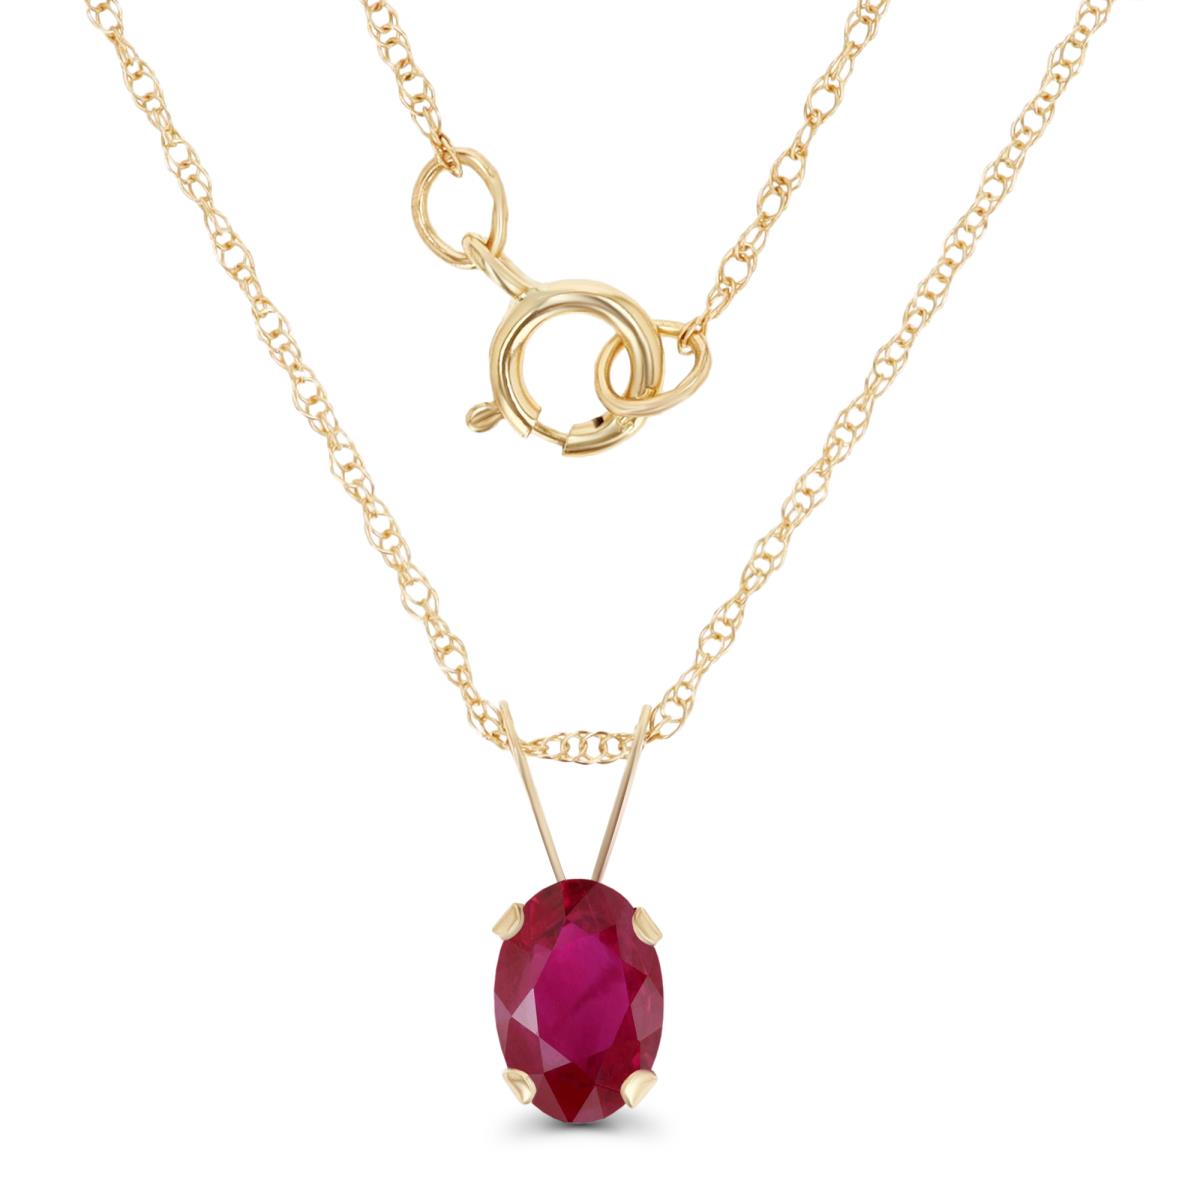 14K Yellow Gold 6x4mm Oval Glass Filled Ruby 18" Rope Chain Necklace